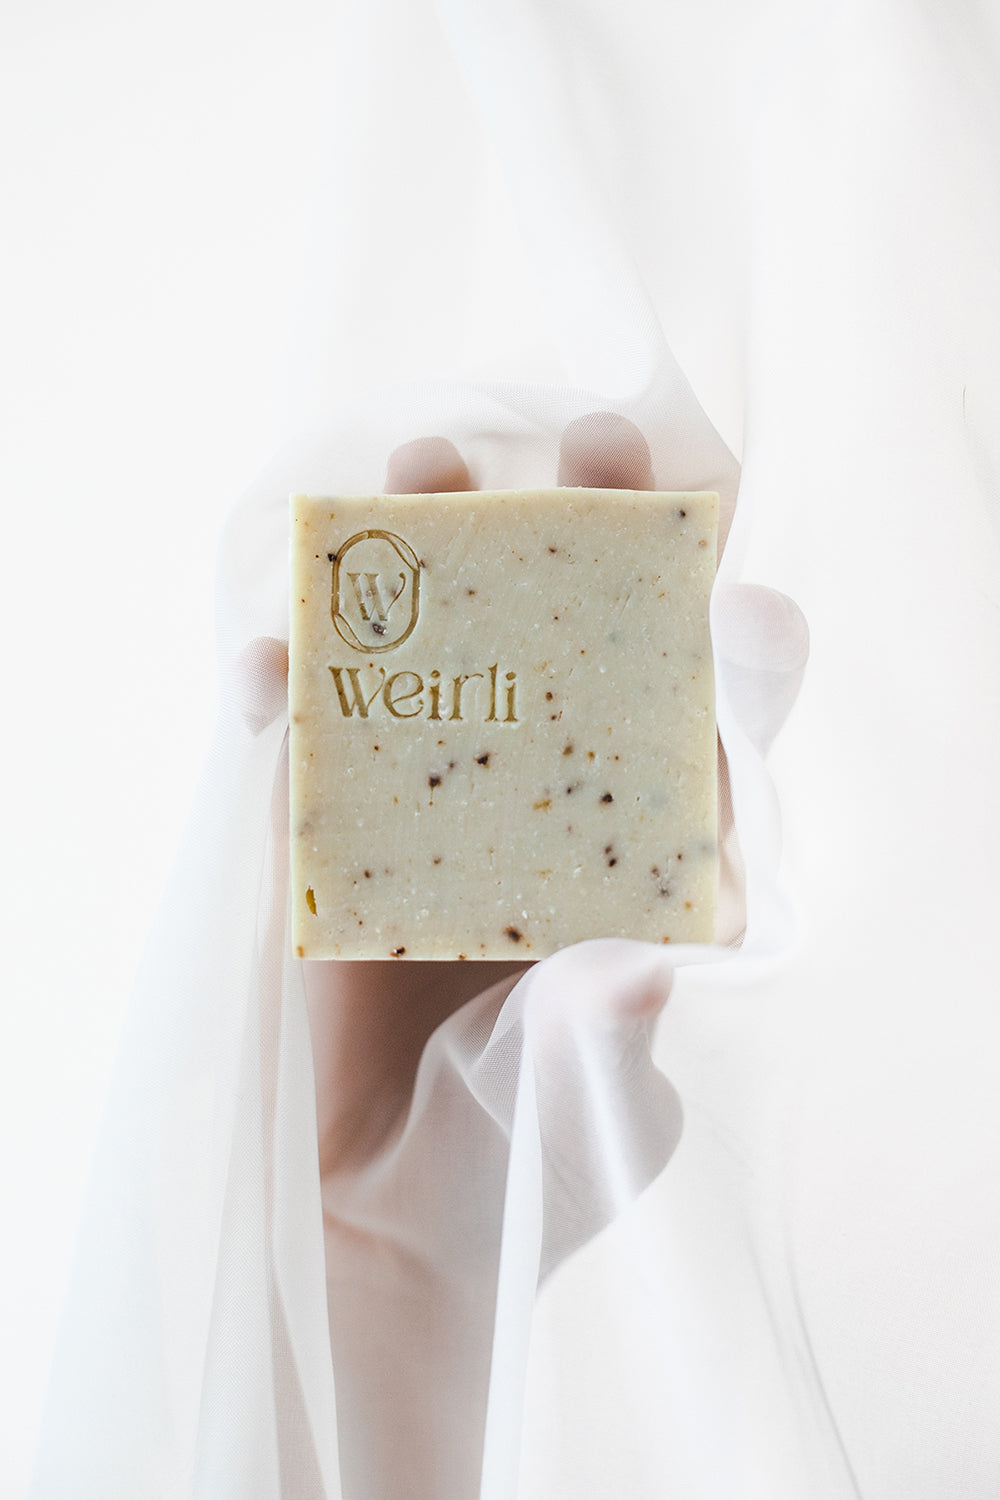 Weirli's Rice and Black Pepper Soap Square on Fabric